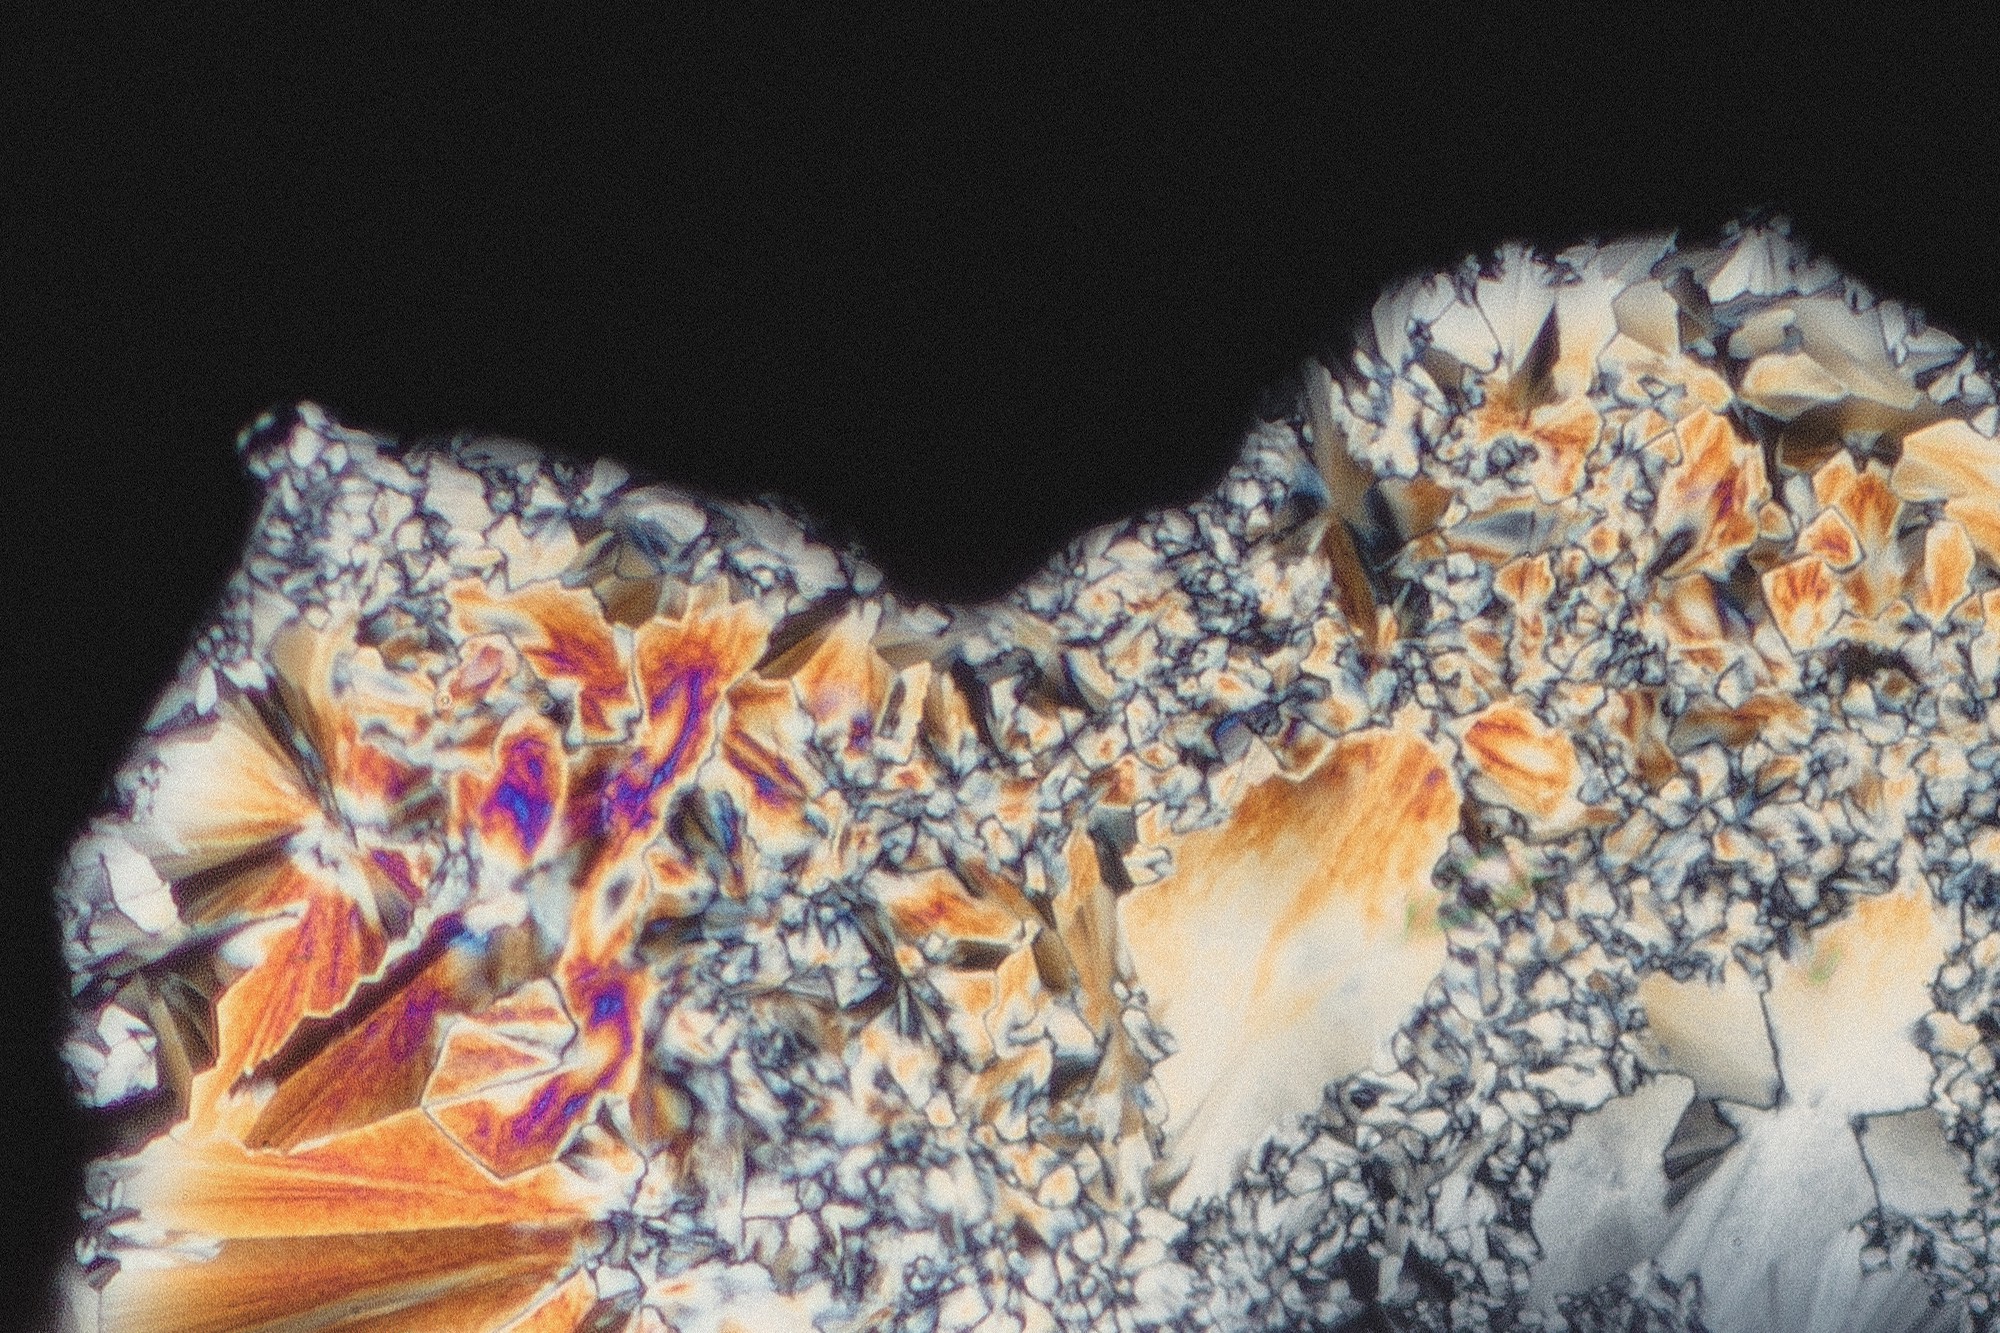 ∢ GHB Crystals ∅ Cross polarisation microscope with 100X enlargement.